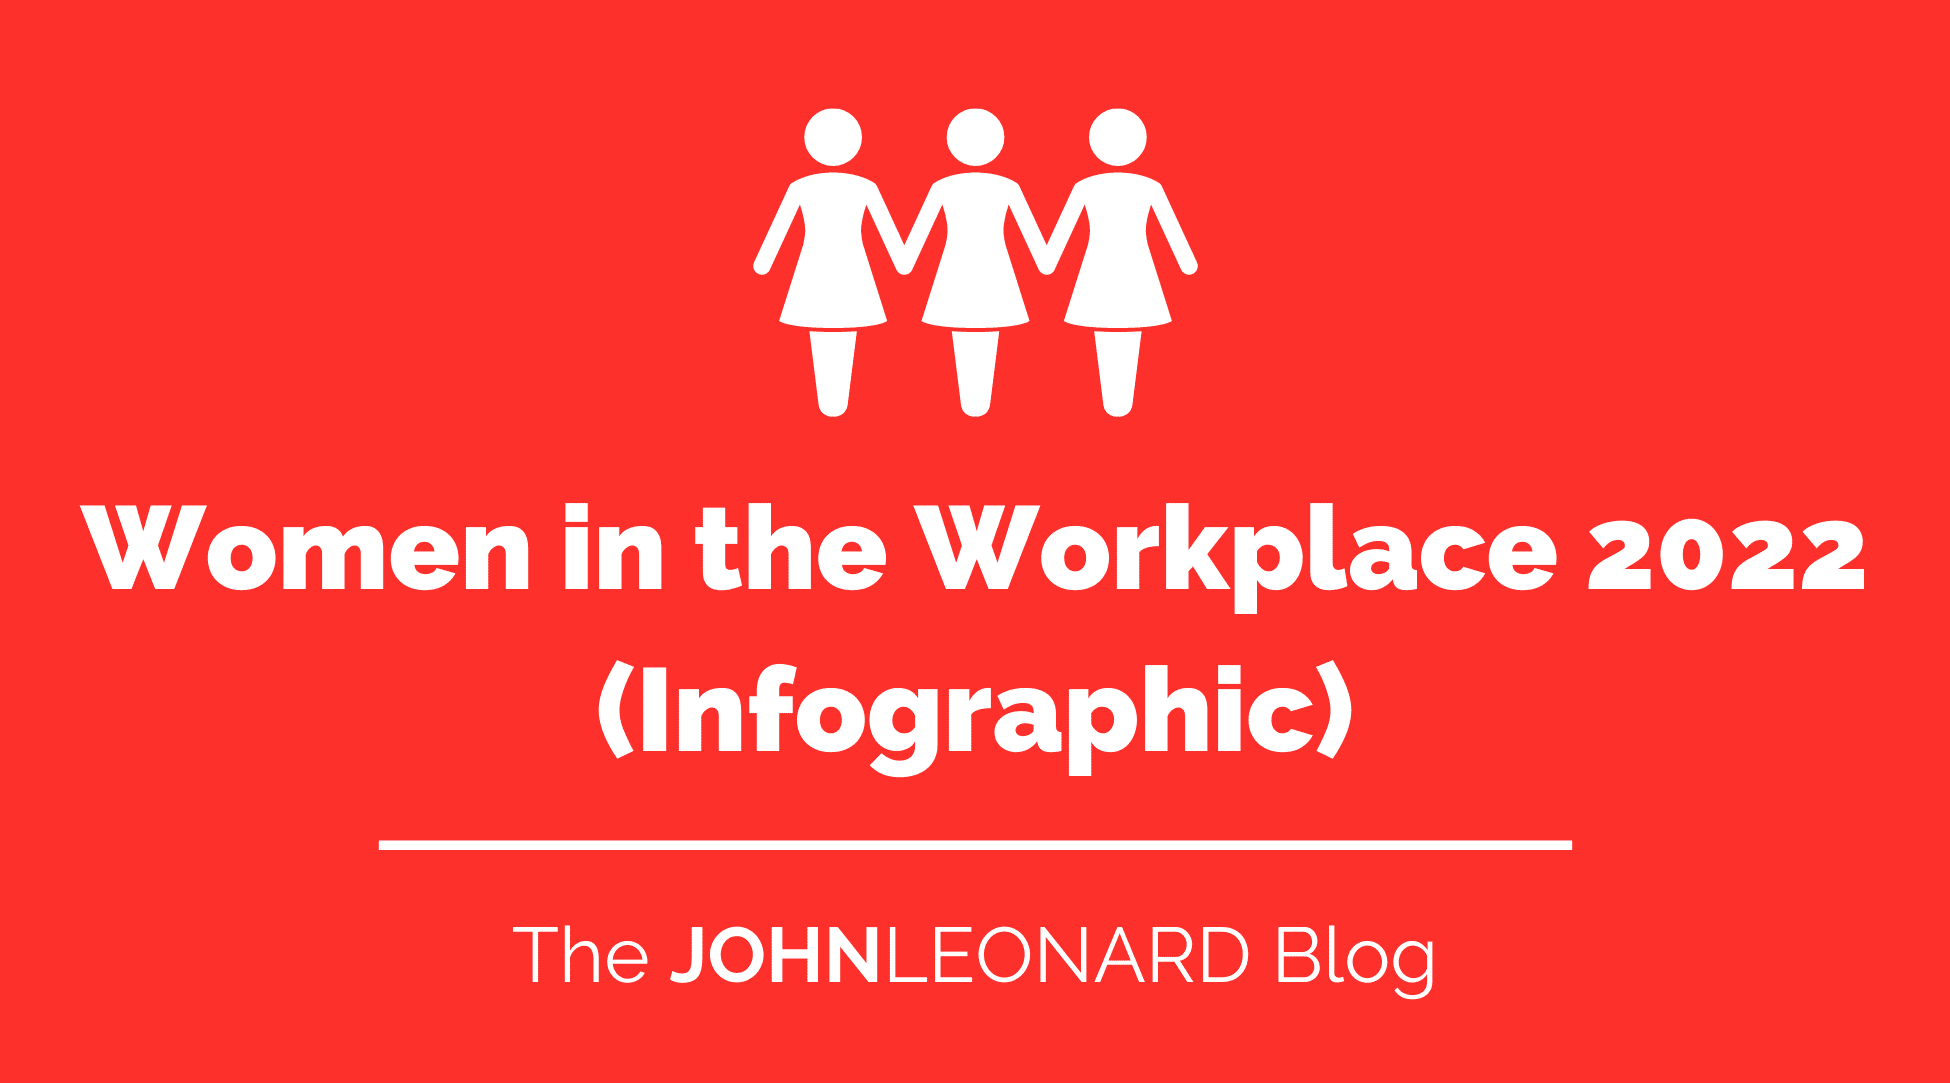 Women in the Workplace (Infographic) (1)